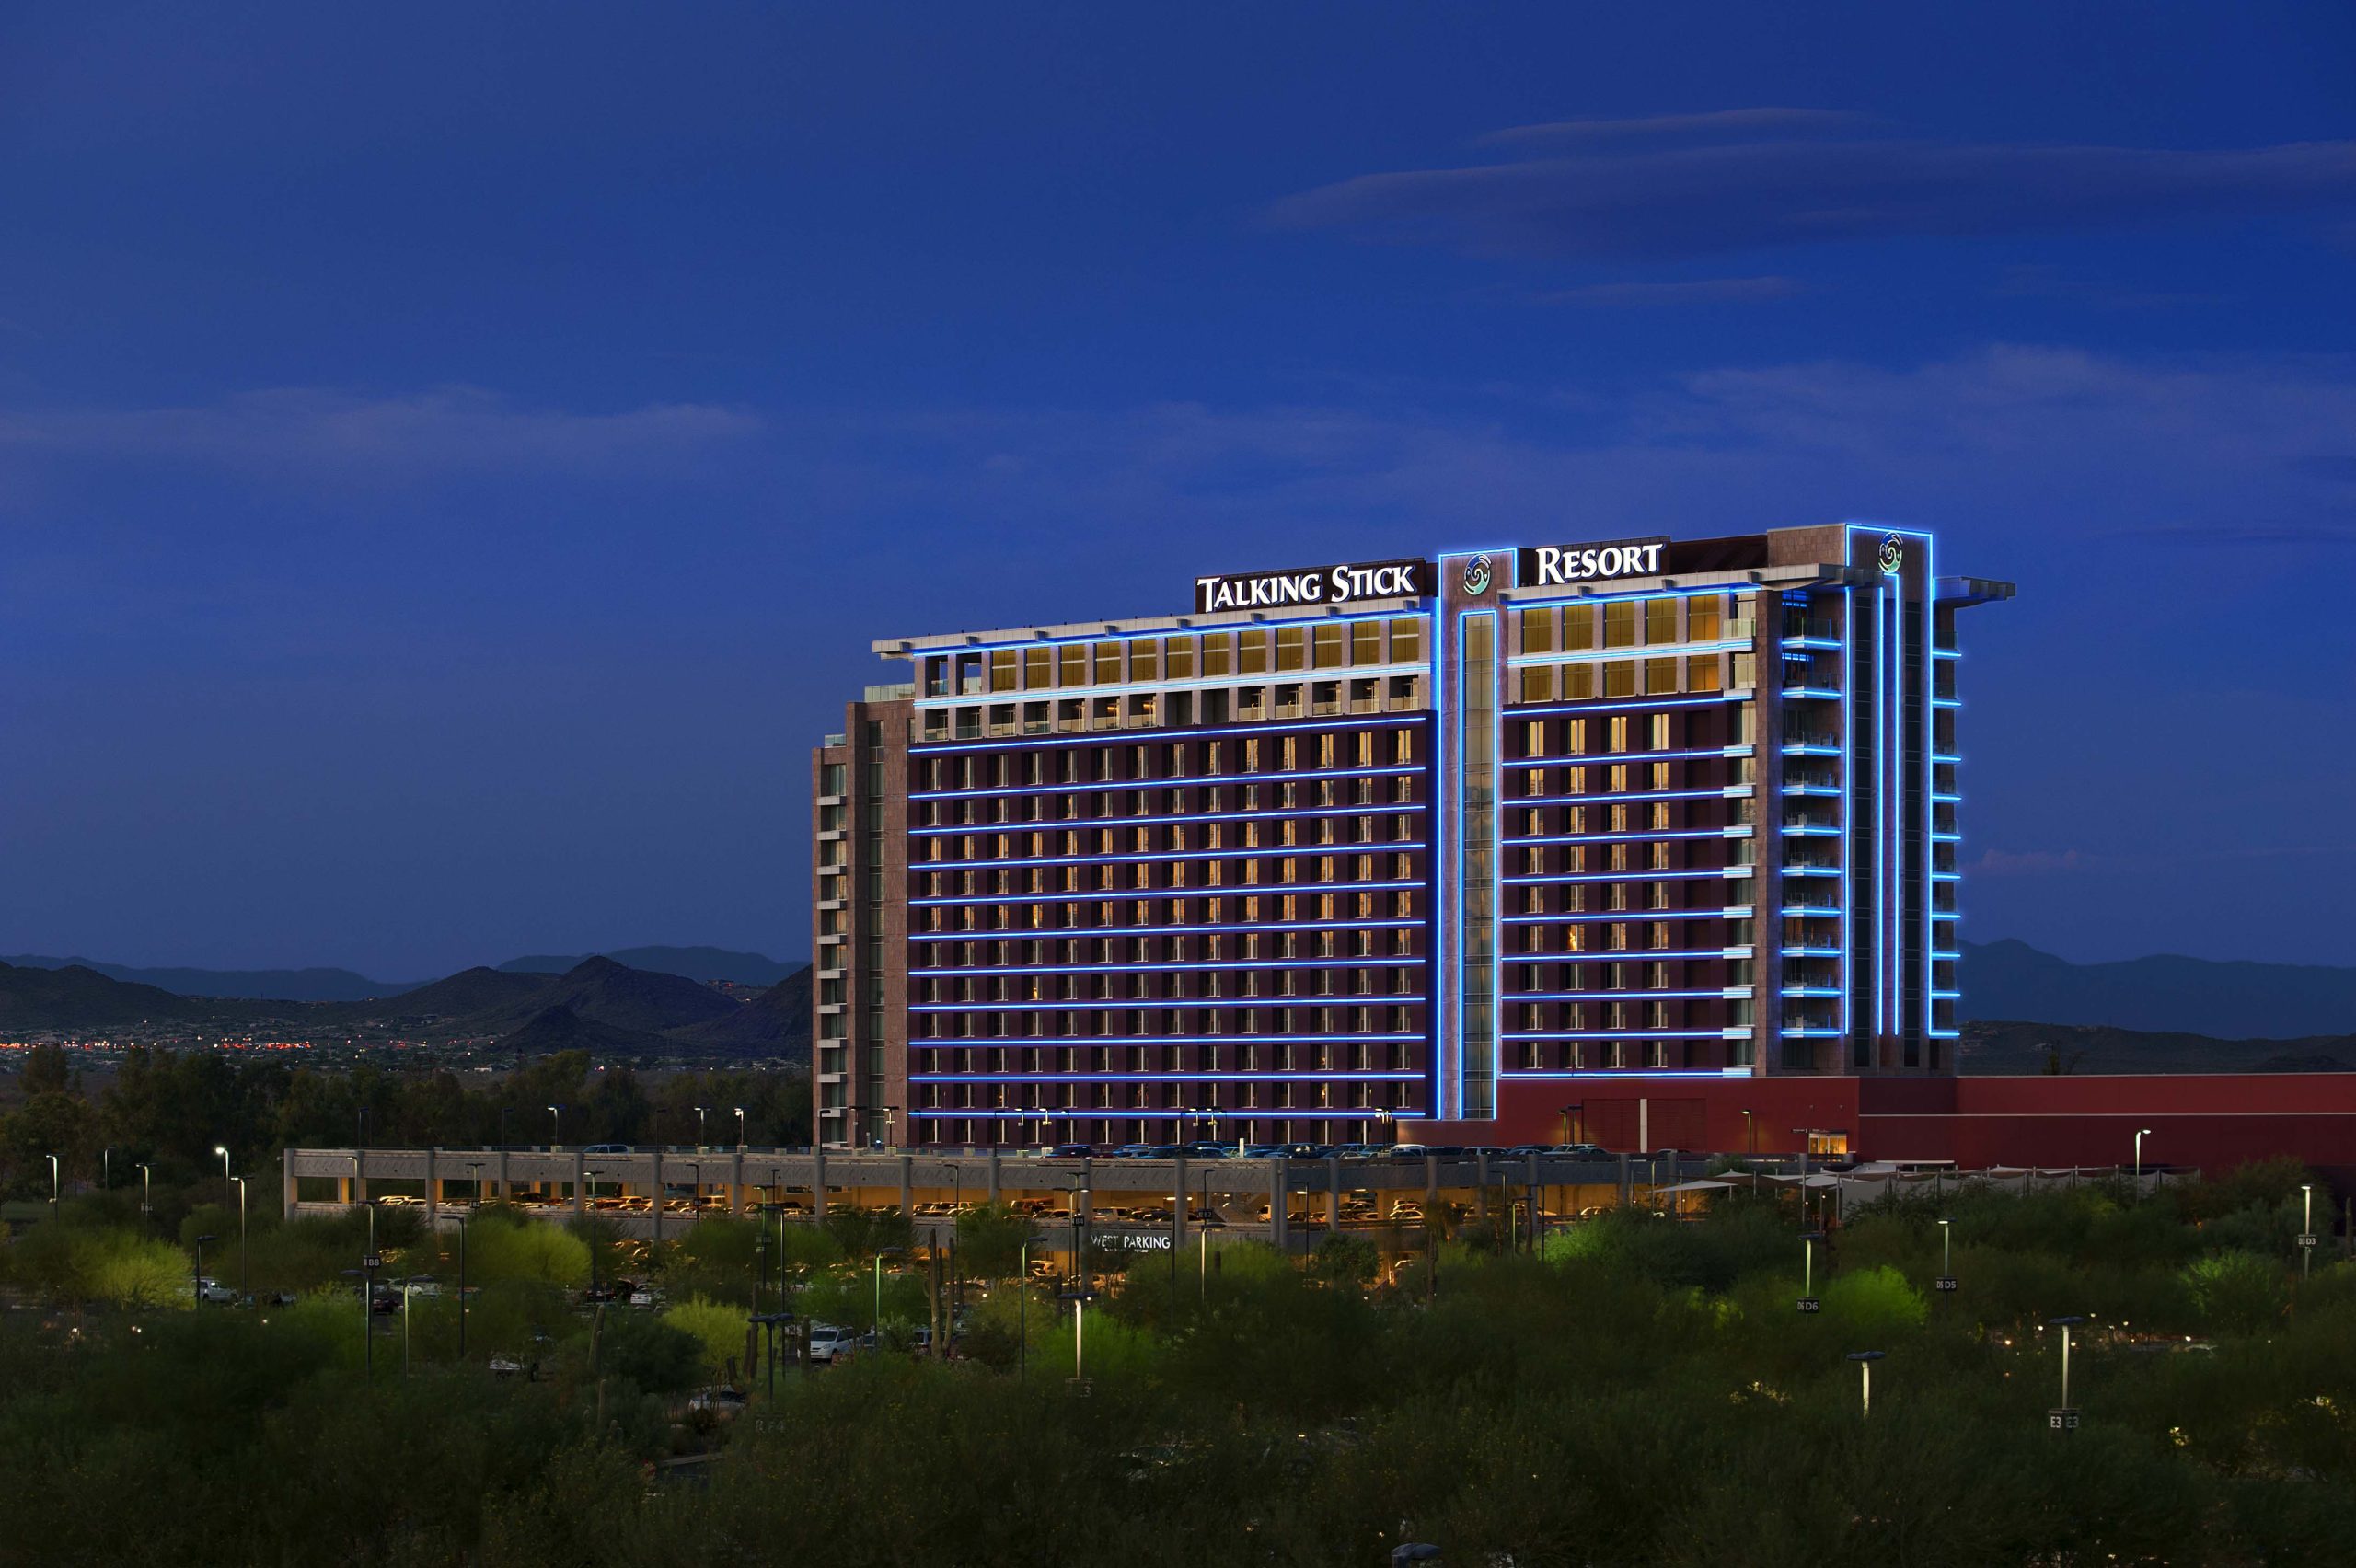 Talking Stick Resort and Casino, a popular thing to do near Salt River, attracting guests to explore and play.